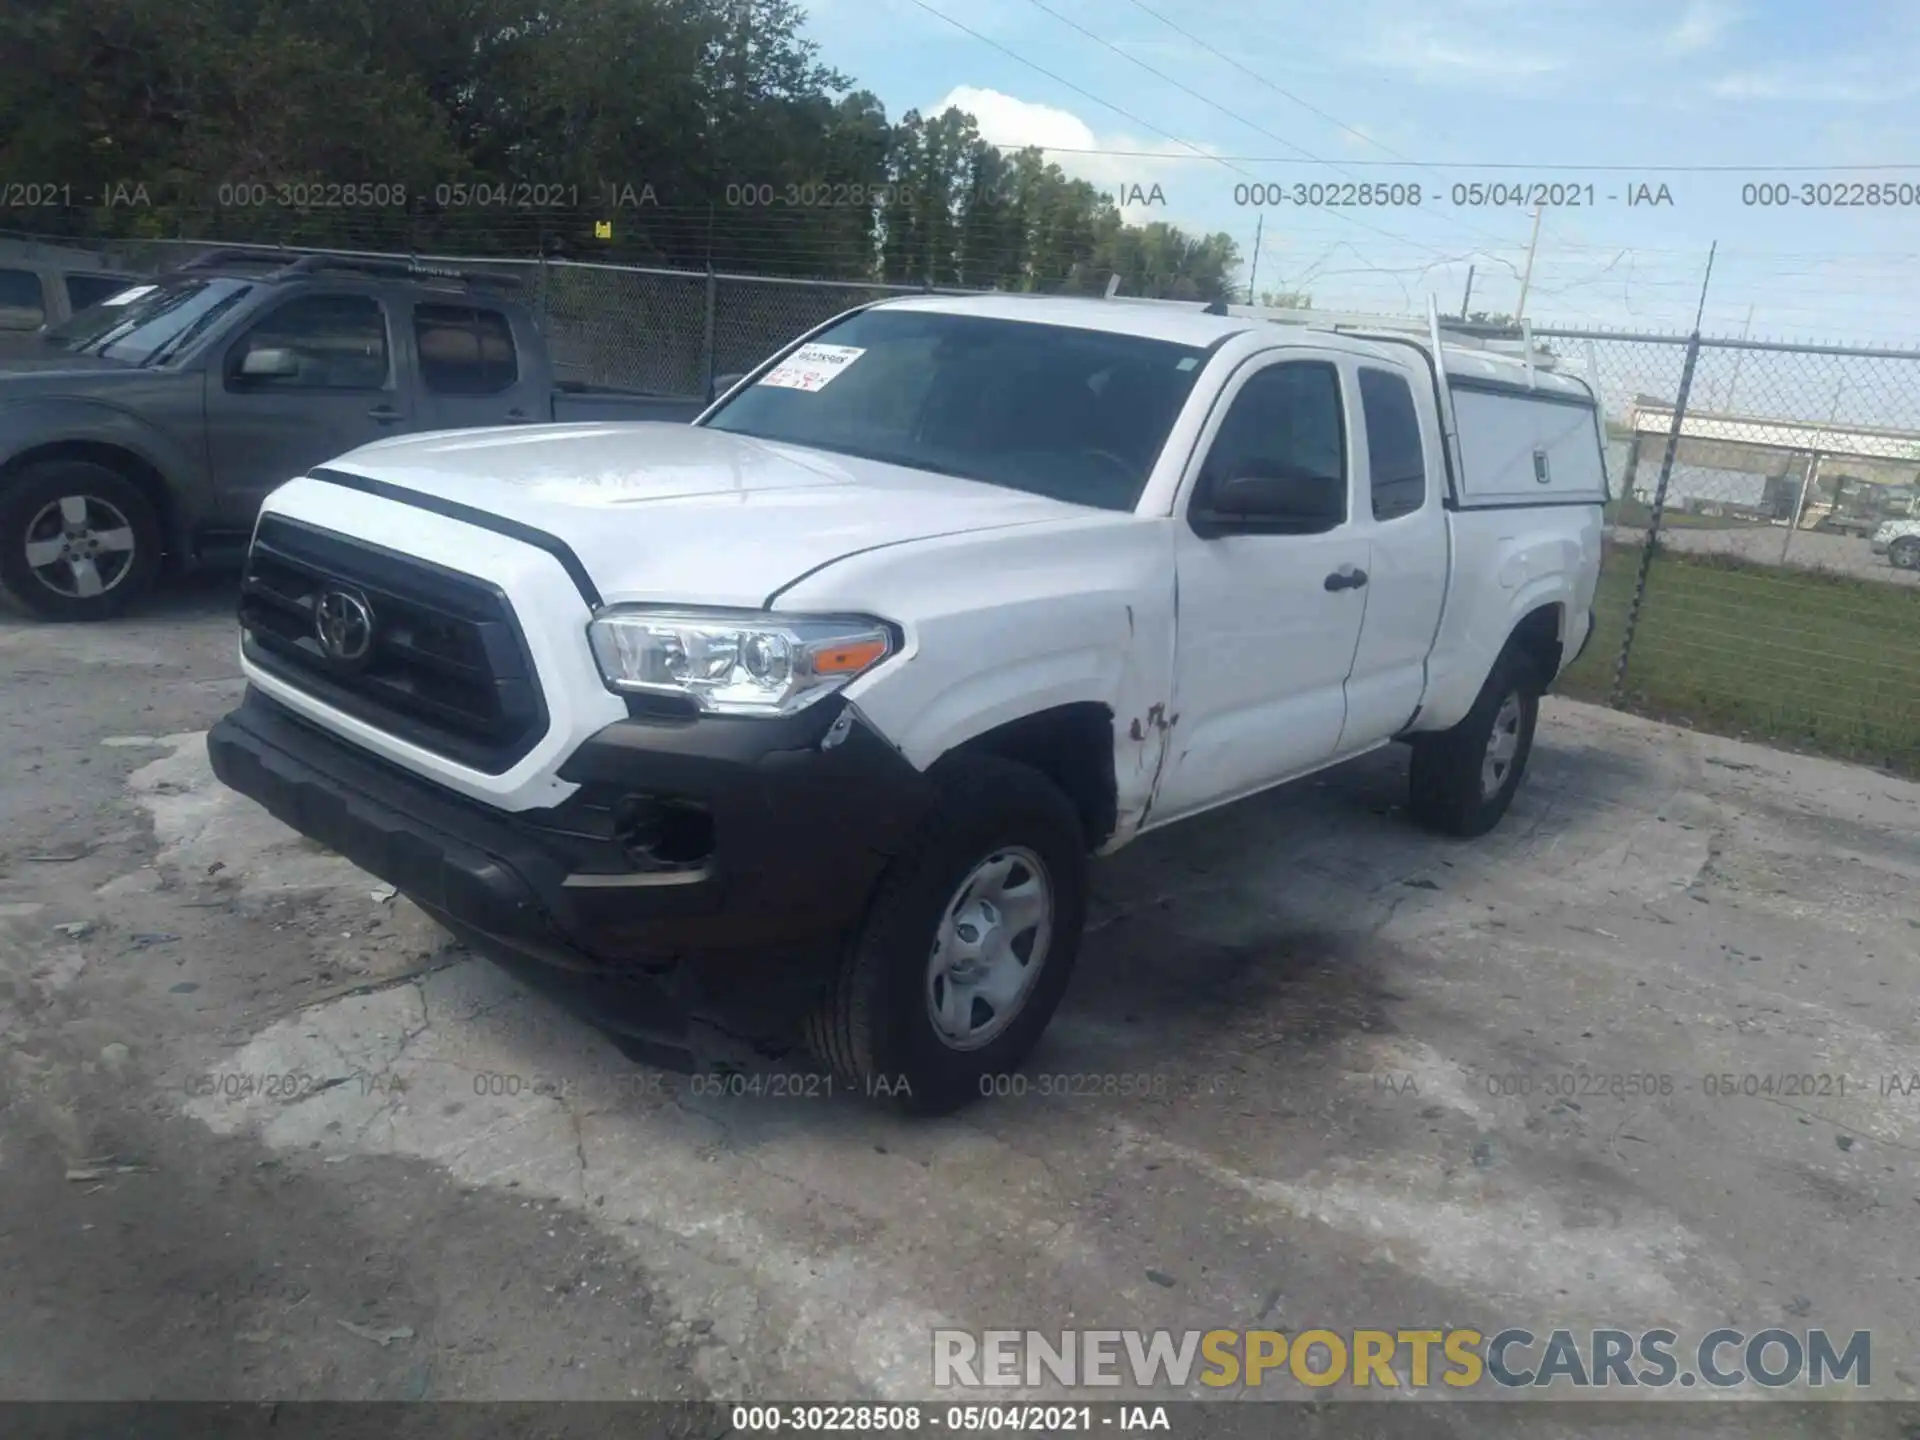 2 Photograph of a damaged car 5TFRX5GN7LX180266 TOYOTA TACOMA 2WD 2020